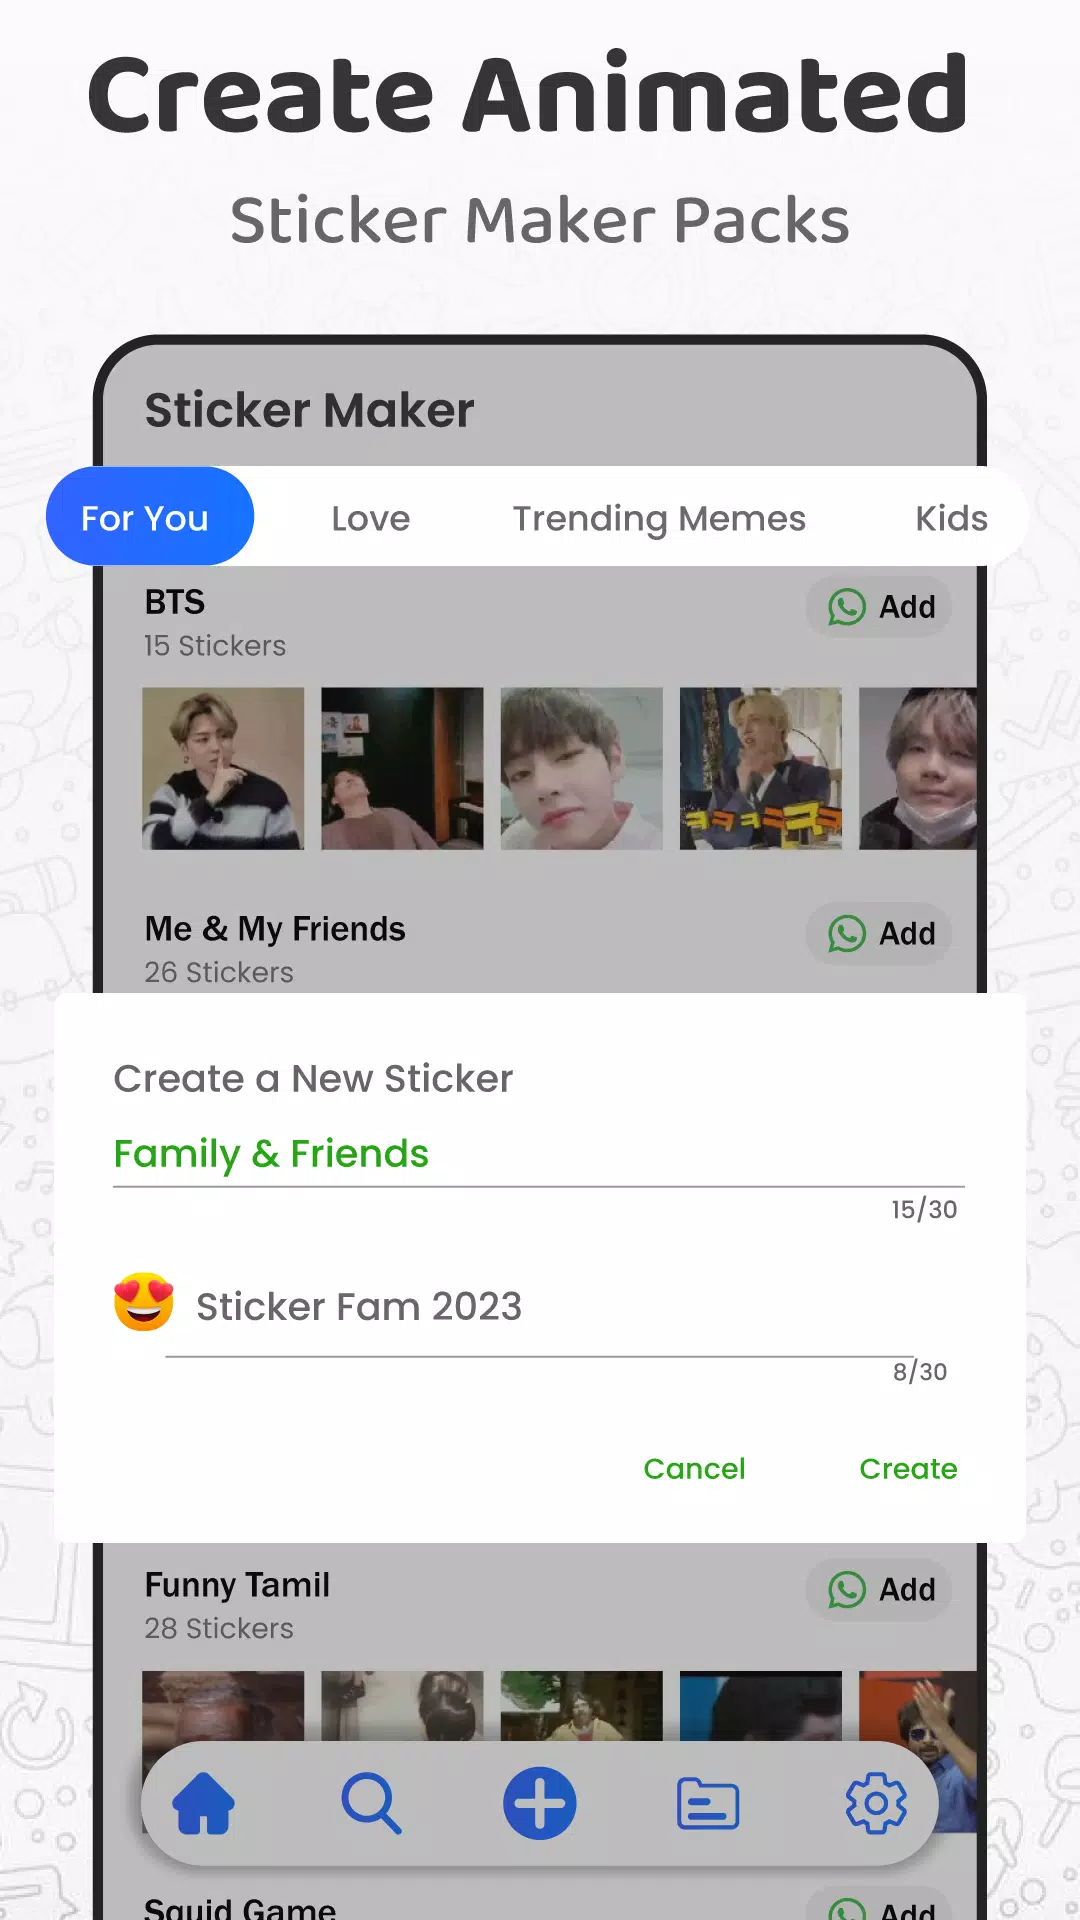 Make moving/animated WhatsApp stickers, Sticker.ly, Part 4, GIF to  sticker